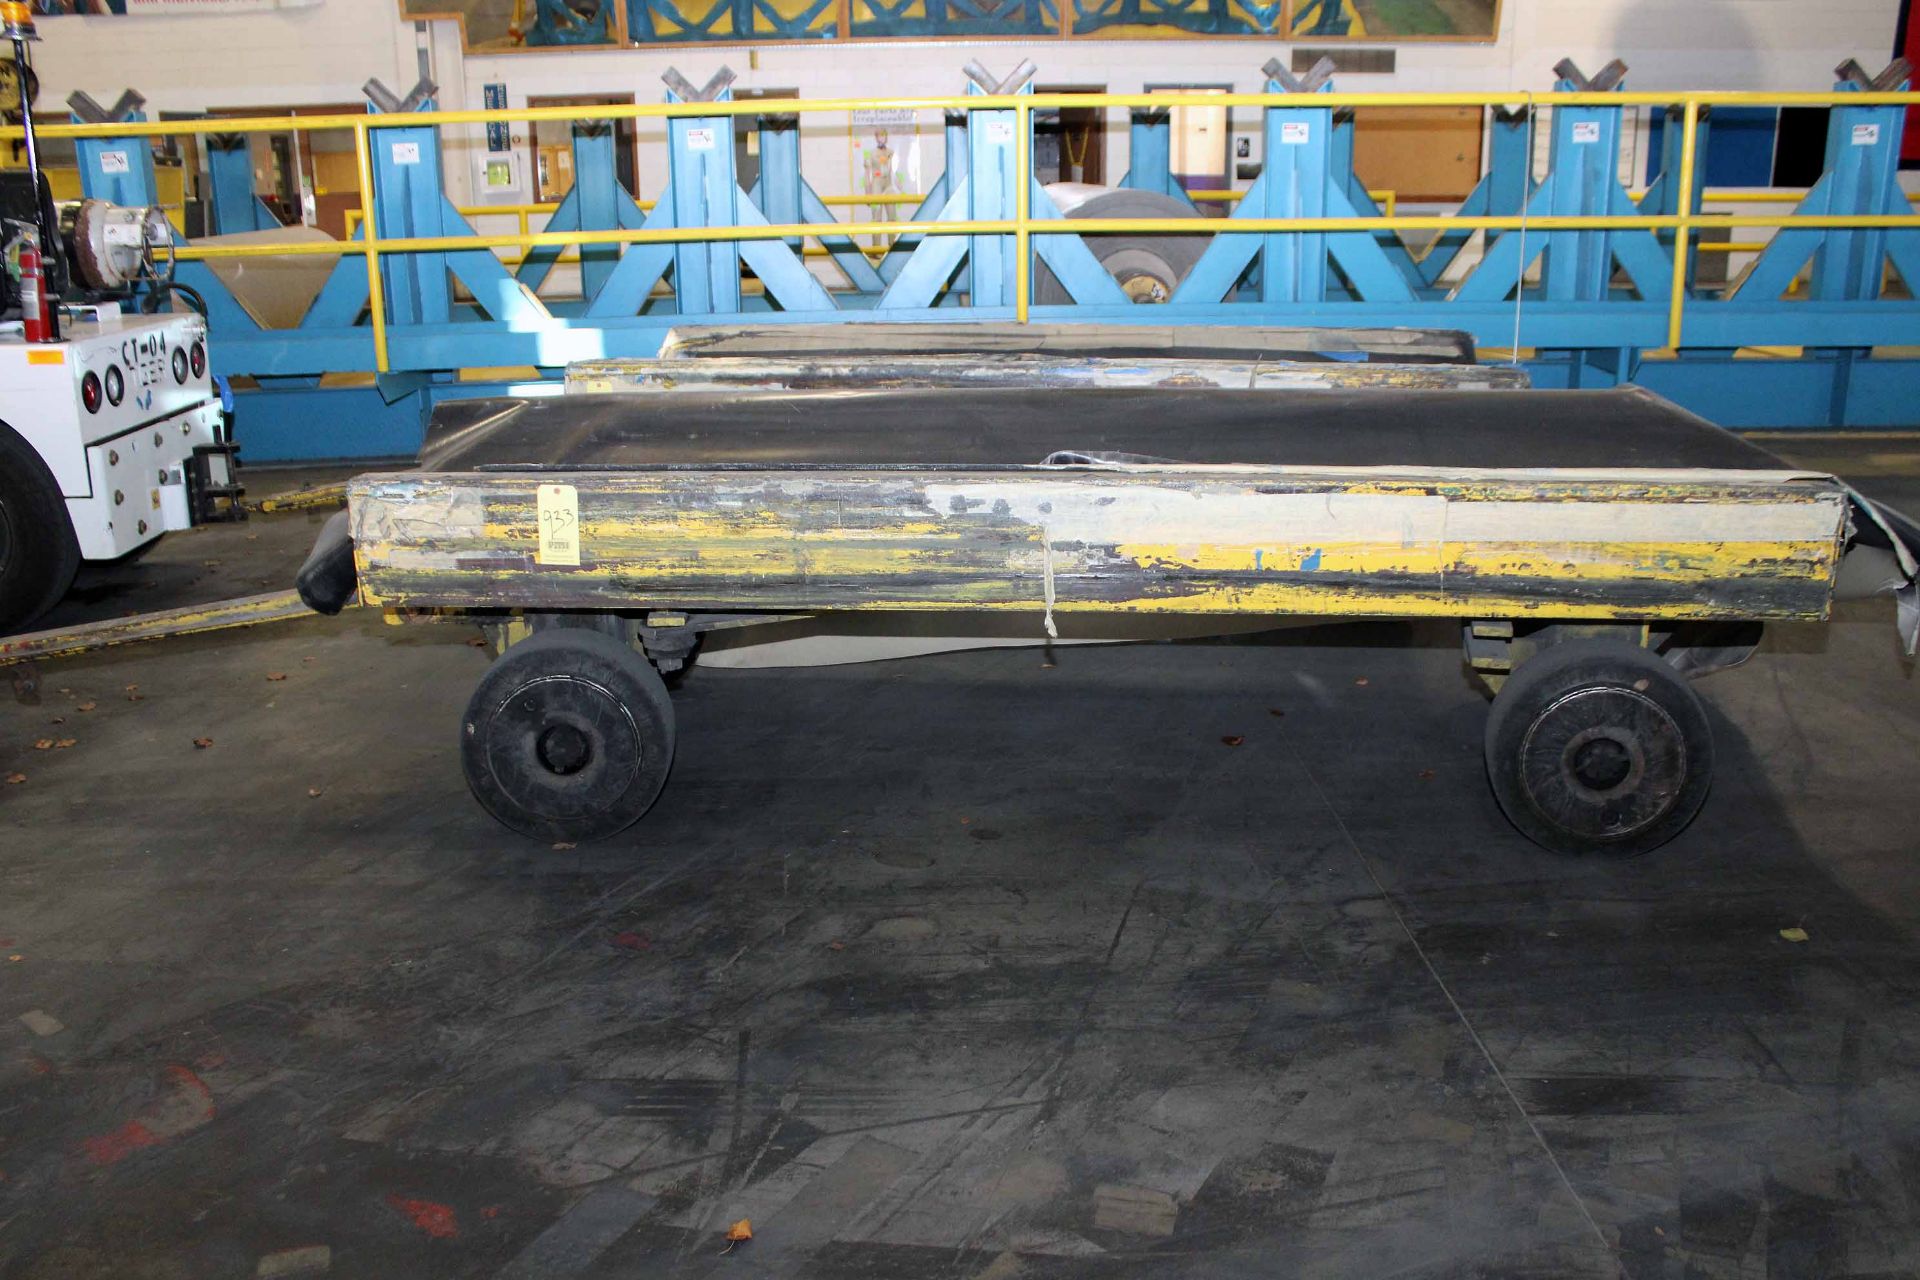 LOT OF (1) METAL ROLL TRAILER, w/ padding for material roll, approx. 4'W. x 9'L. x 3'ht., tongue